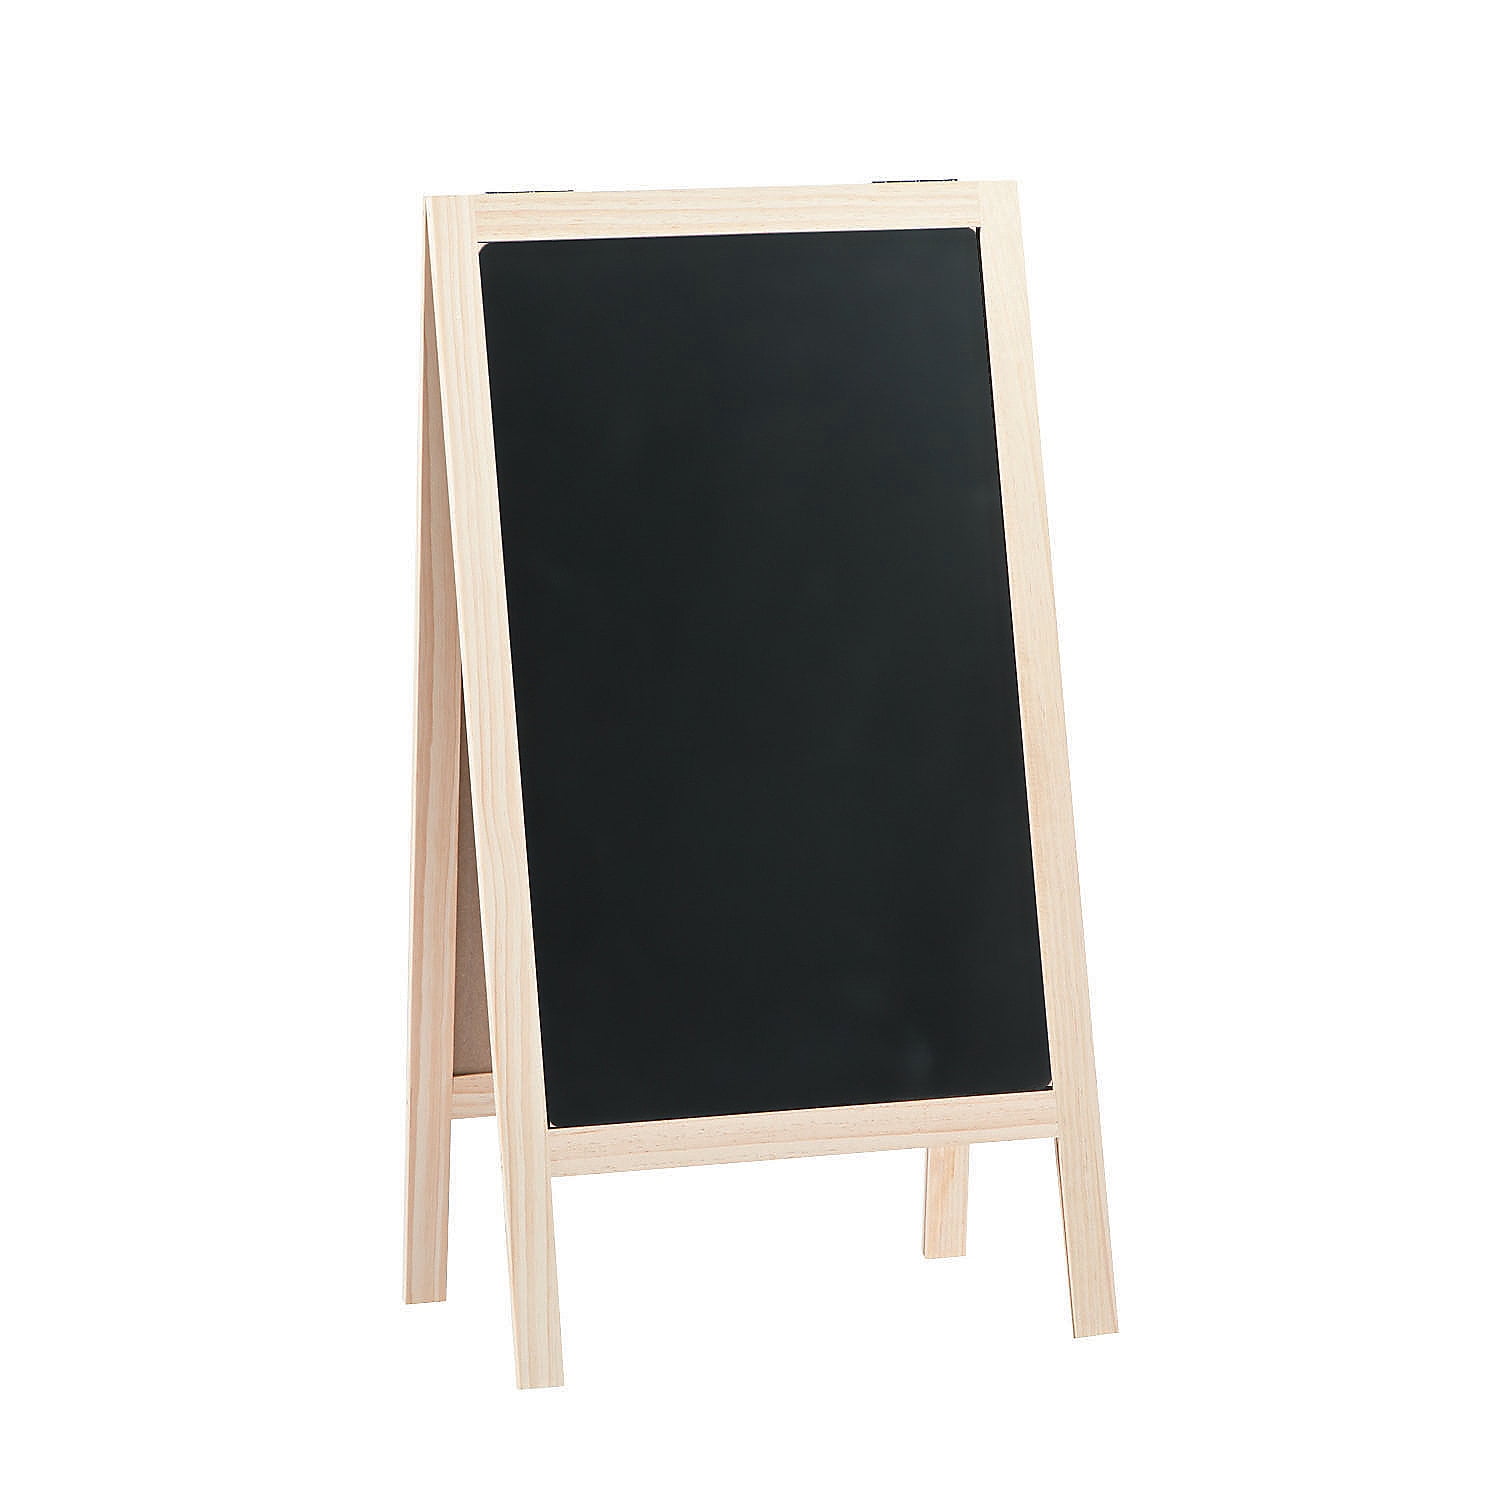 UNHO Wooden Chalkboard Easel Display Stand Wood Ladder Shelf A Frame Sign Board Freestanding Sandwich Board with Slatted Tray for Cafe Bar Book Store Restaurant